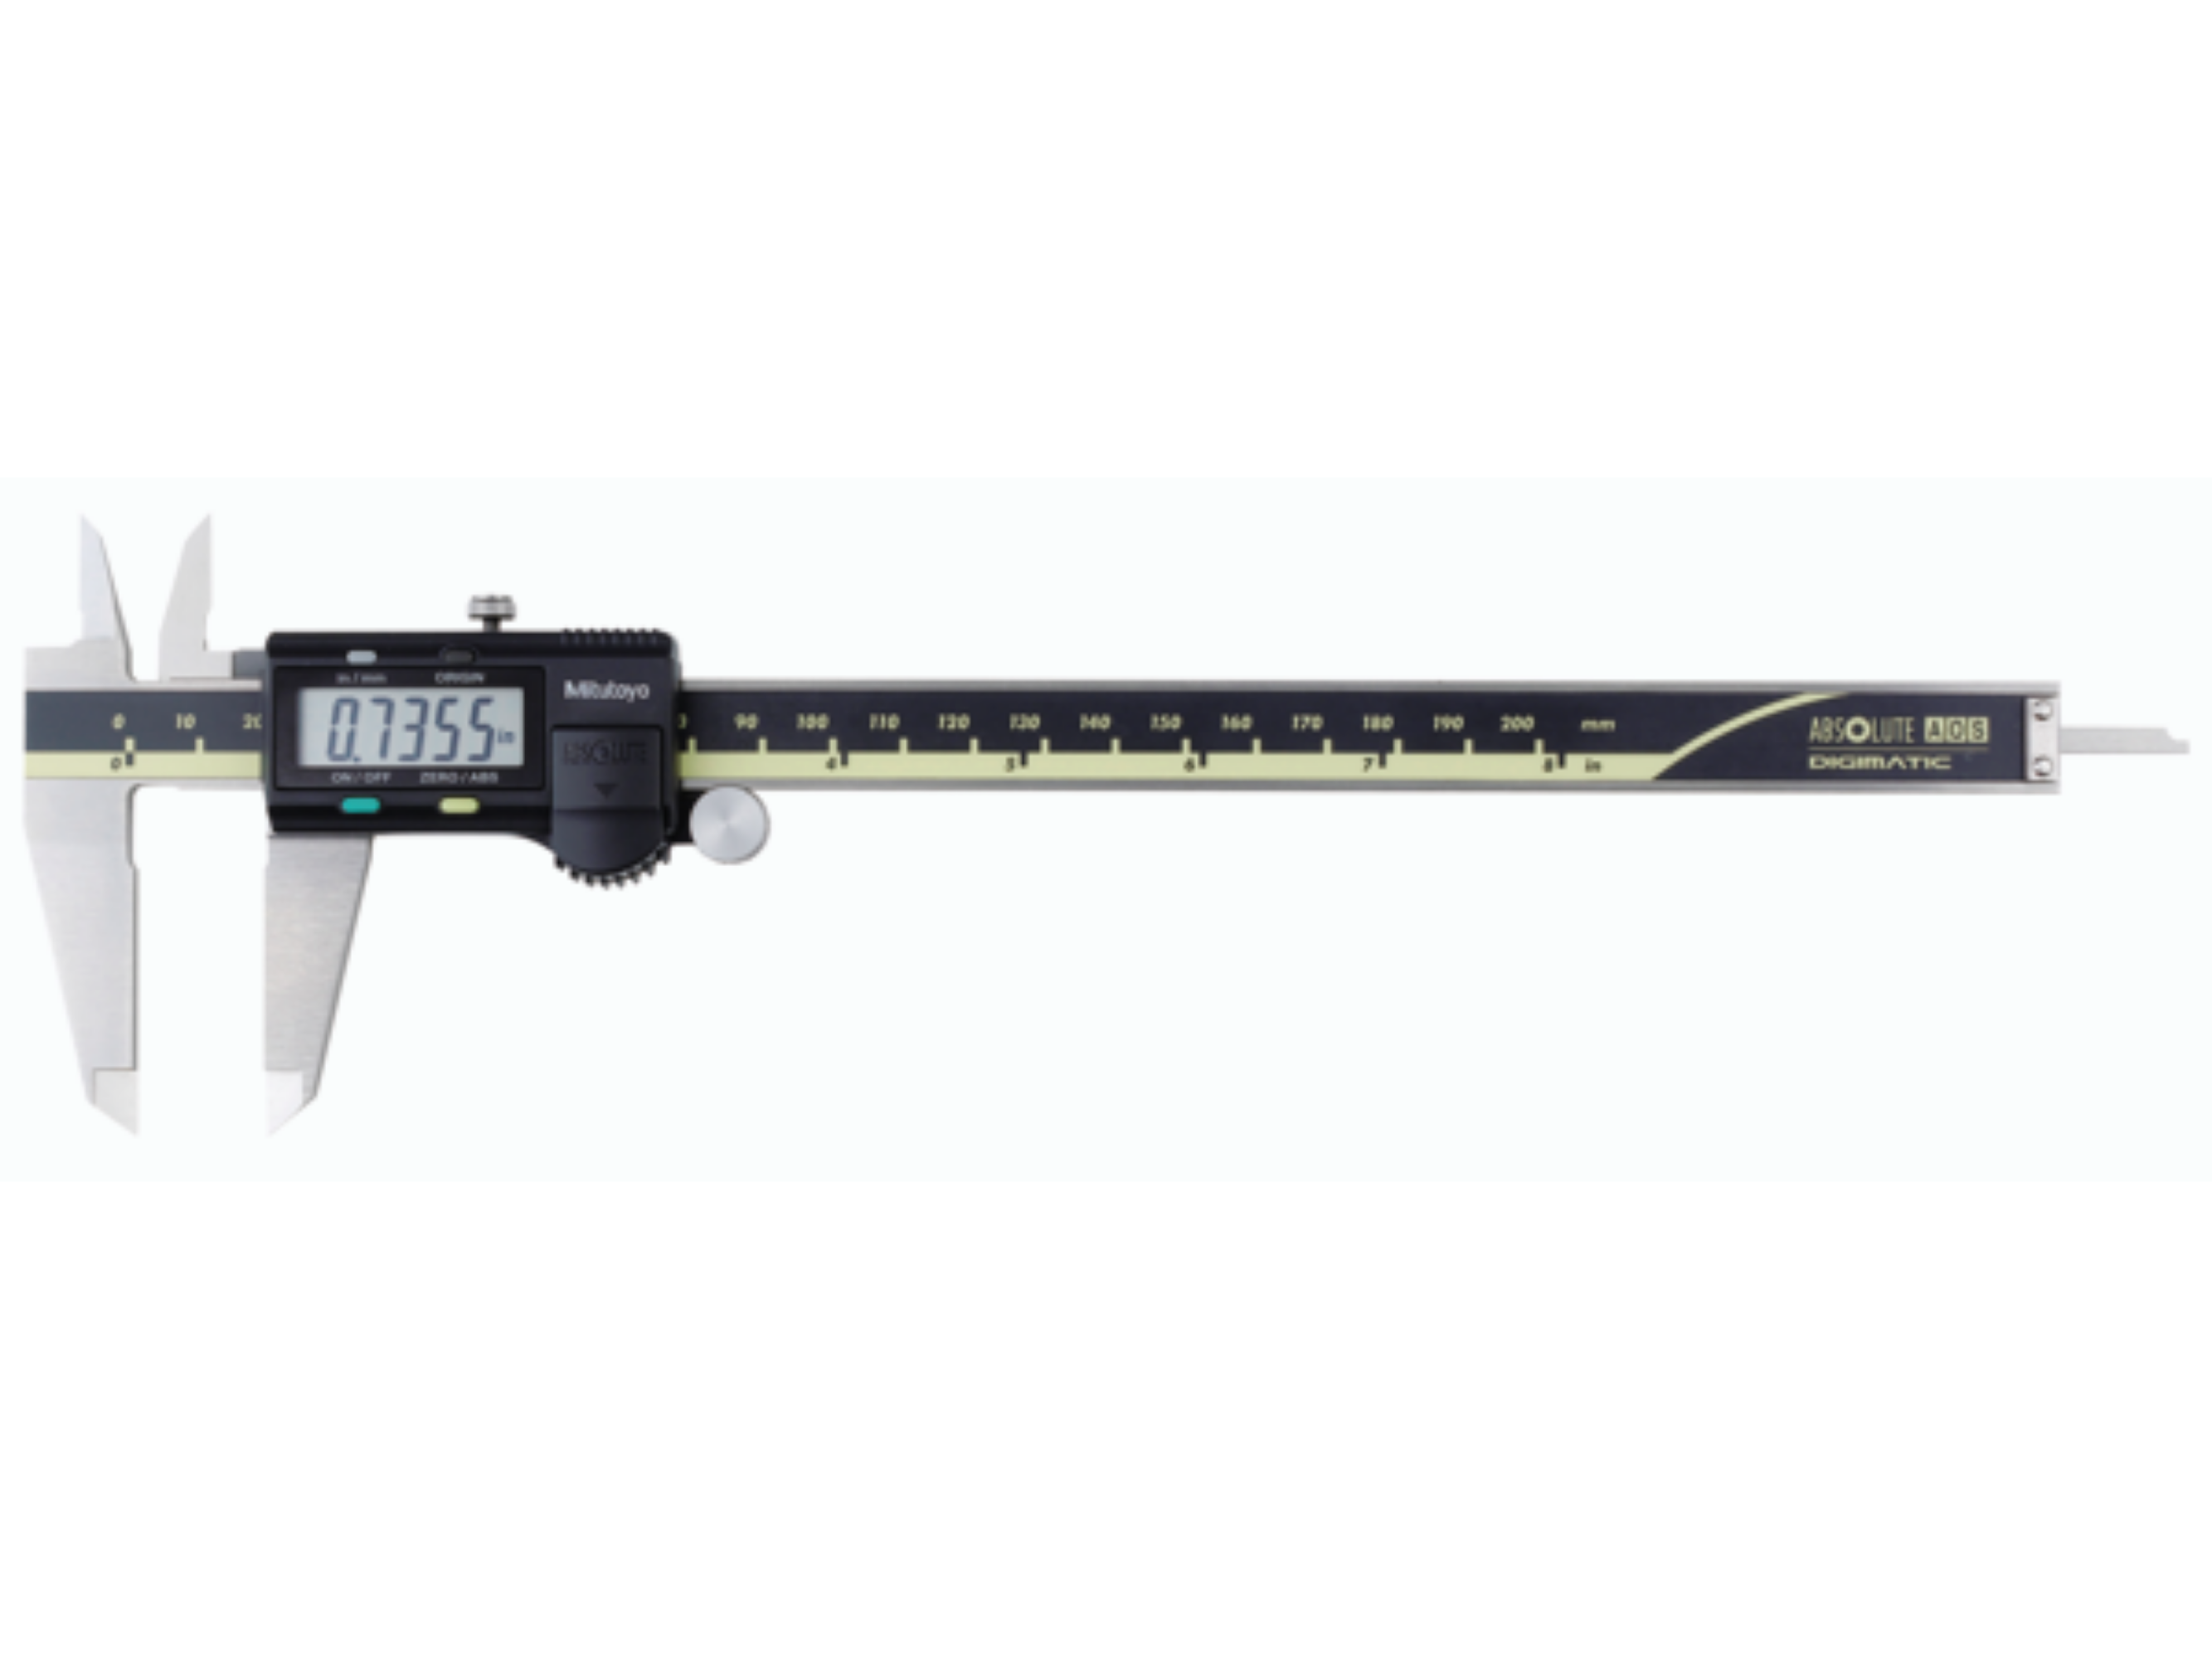 ABSOLUTE AOS Calipers 0-200mm Square Depth Rod 500-204-30